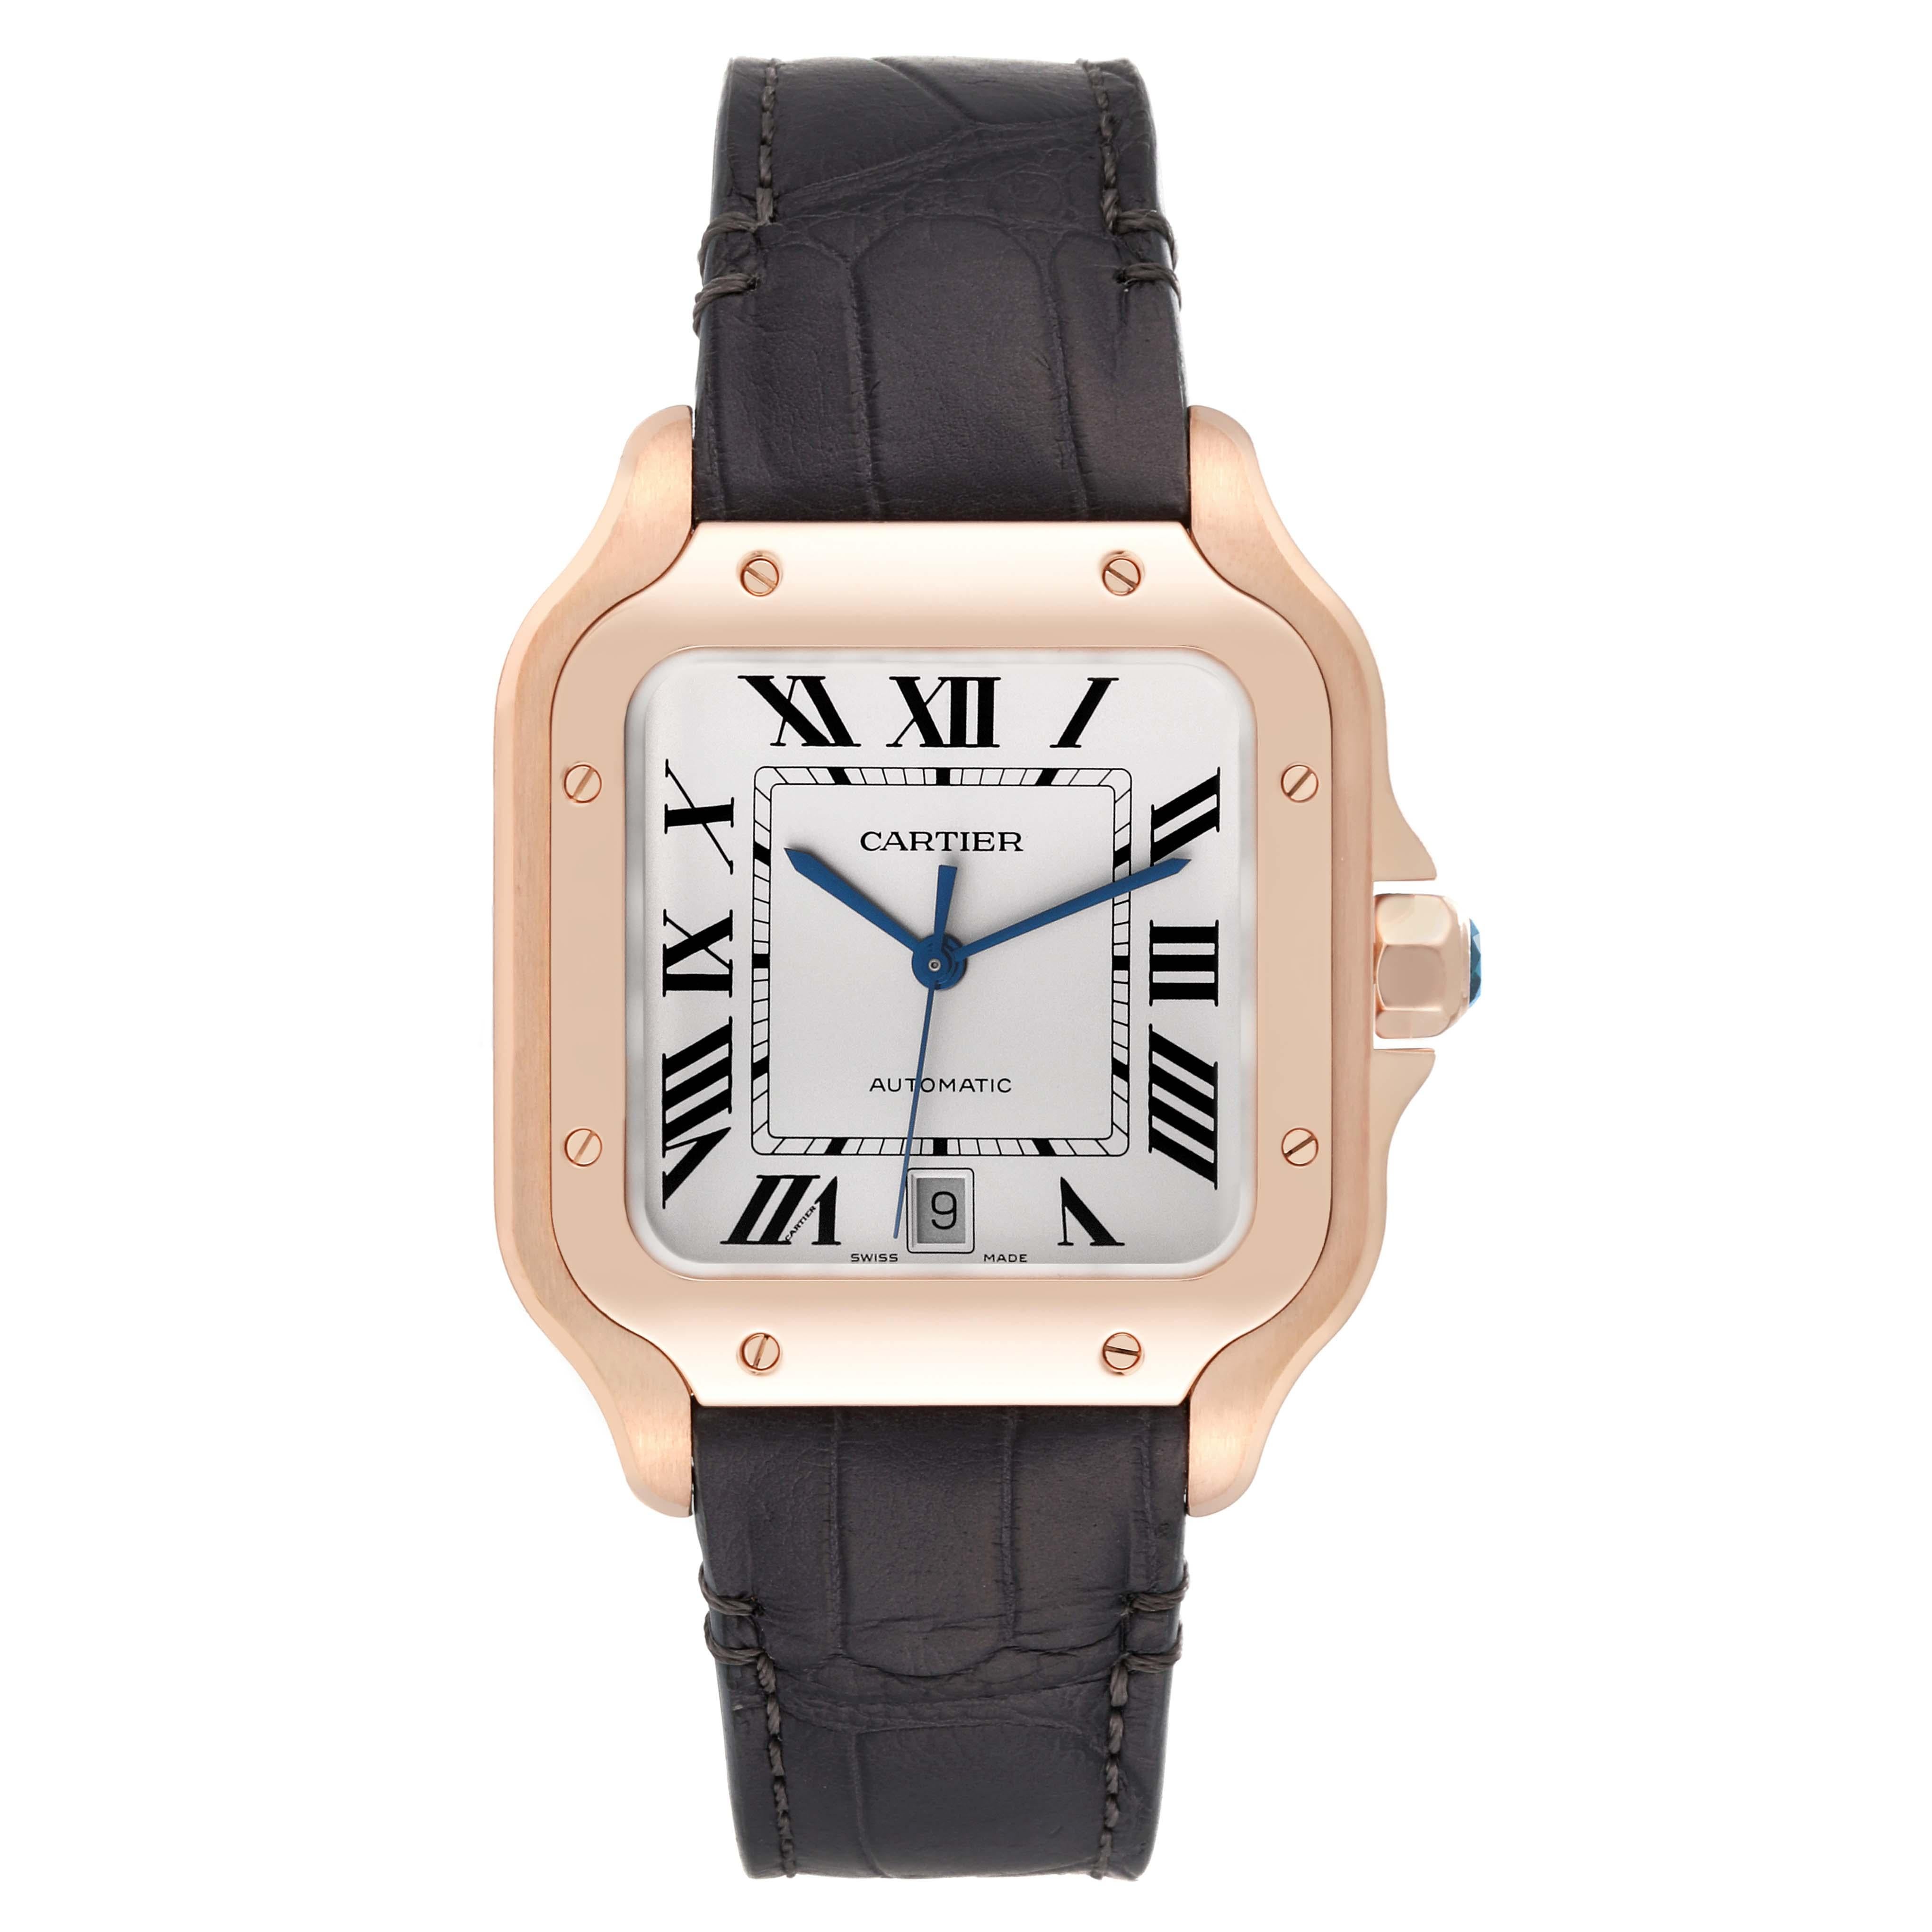 Cartier Santos Large Rose Gold Grey Strap Mens Watch WGSA0019 Box Card In Excellent Condition For Sale In Atlanta, GA